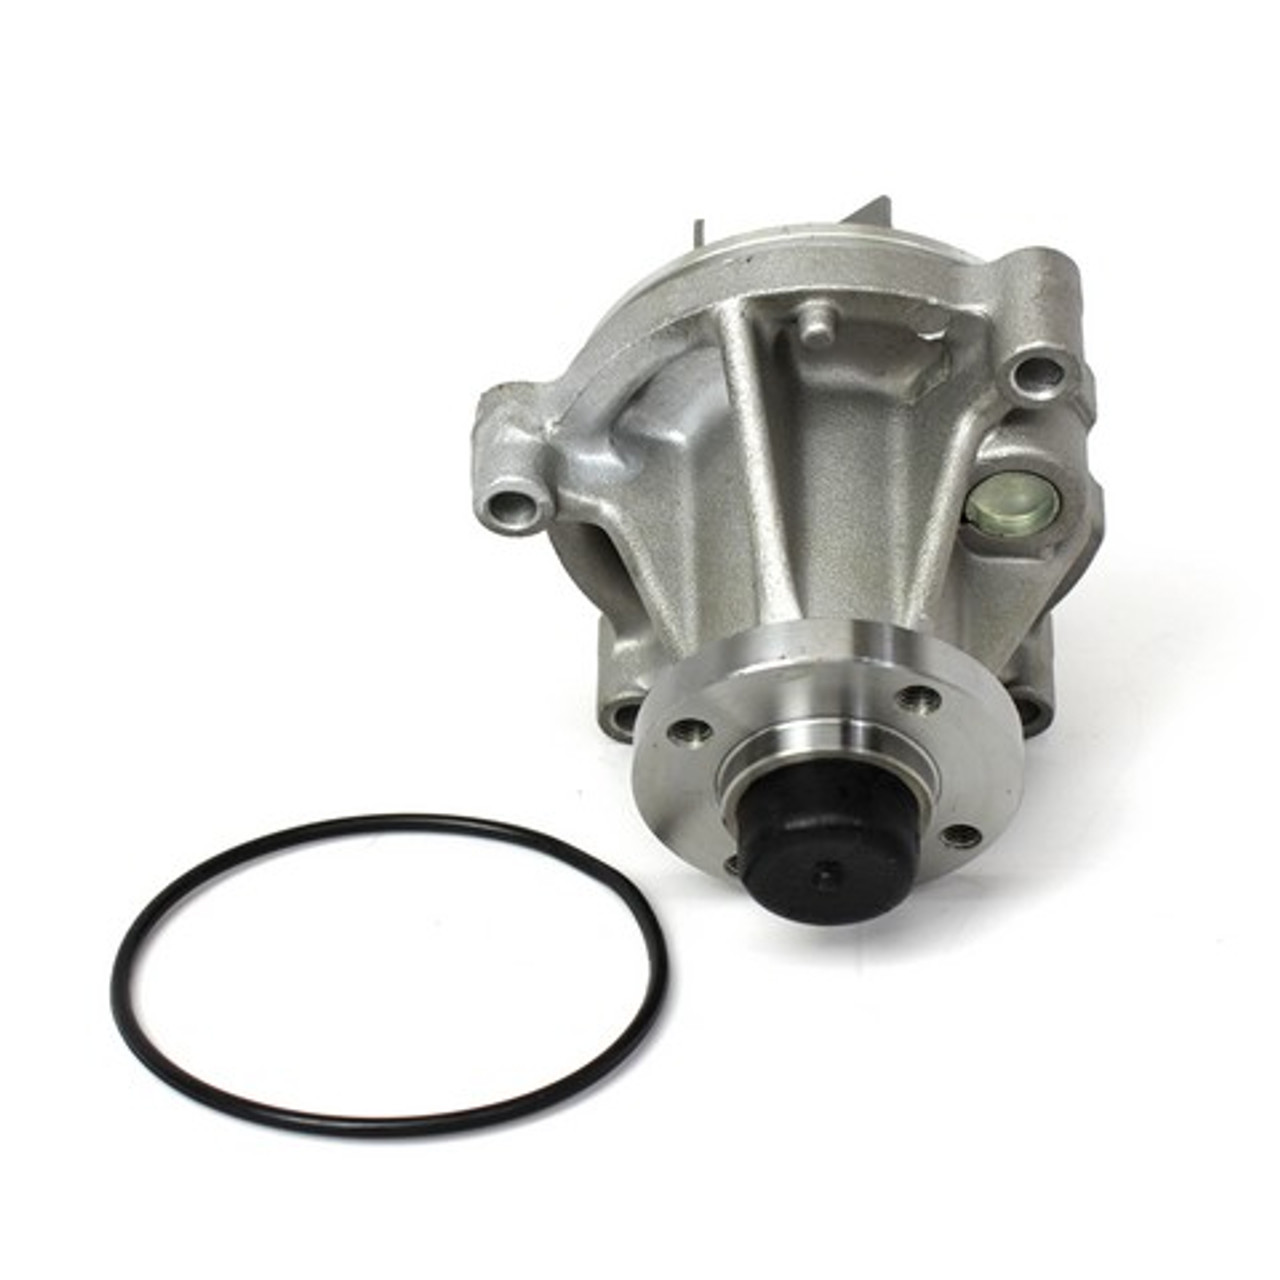 Water Pump 5.4L 2014 Ford E-250 - WP4170.54